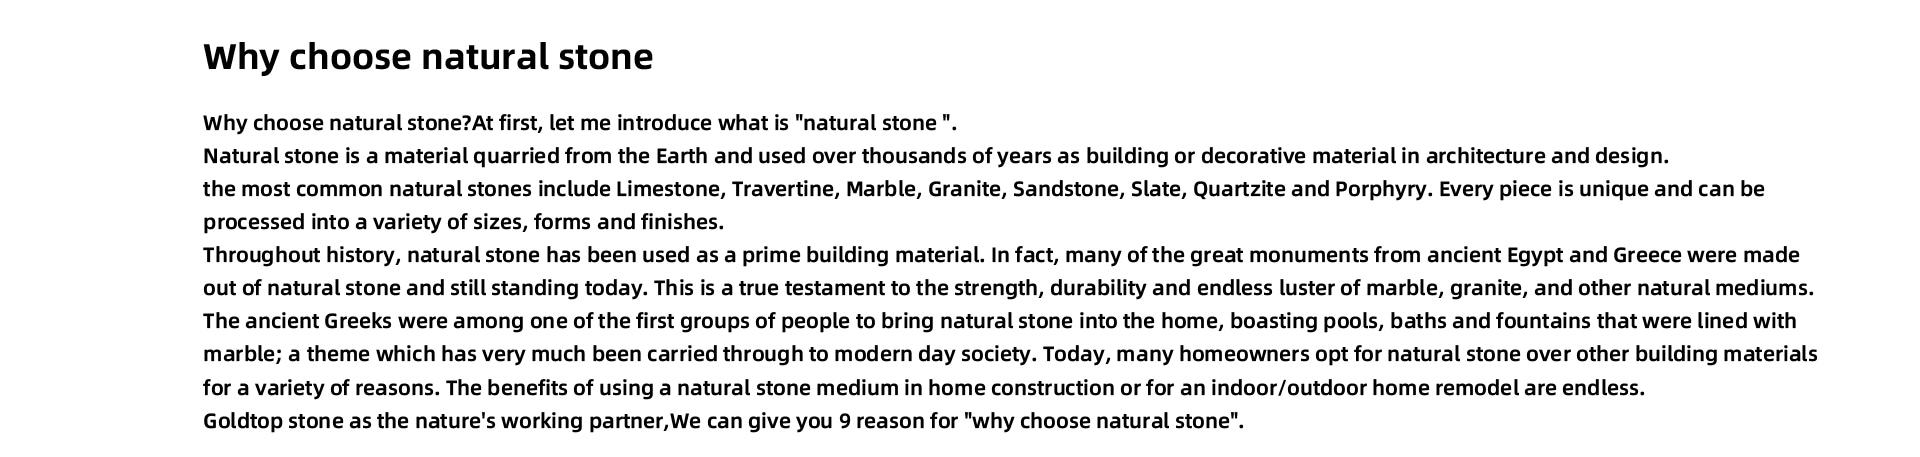 why choose natural stone Why choose natural stone?At first, let me introduce what is "natural stone ". Natural stone is a material quarried from the Earth and used over thousands of years as building or decorative material in architecture and design. the most common natural stones include Limestone, Travertine, Marble, Granite, Sandstone, Slate, Quartzite and Porphyry. Every piece is unique and can be processed into a variety of sizes, forms and finishes. Throughout history, natural stone has been used as a prime building material. In fact, many of the great monuments from ancient Egypt and Greece were made out of natural stone and still standing today. This is a true testament to the strength, durability and endless luster of marble, granite, and other natural mediums. The ancient Greeks were among one of the first groups of people to bring natural stone into the home, boasting pools, baths and fountains that were lined with marble; a theme which has very much been carried through to modern day society. Today, many homeowners opt for natural stone over other building materials for a variety of reasons. The benefits of using a natural stone medium in home construction or for an indoor/outdoor home remodel are endless. Goldtop stone as the nature's working partner,We can give you 9 reason for "why choose natural stone".